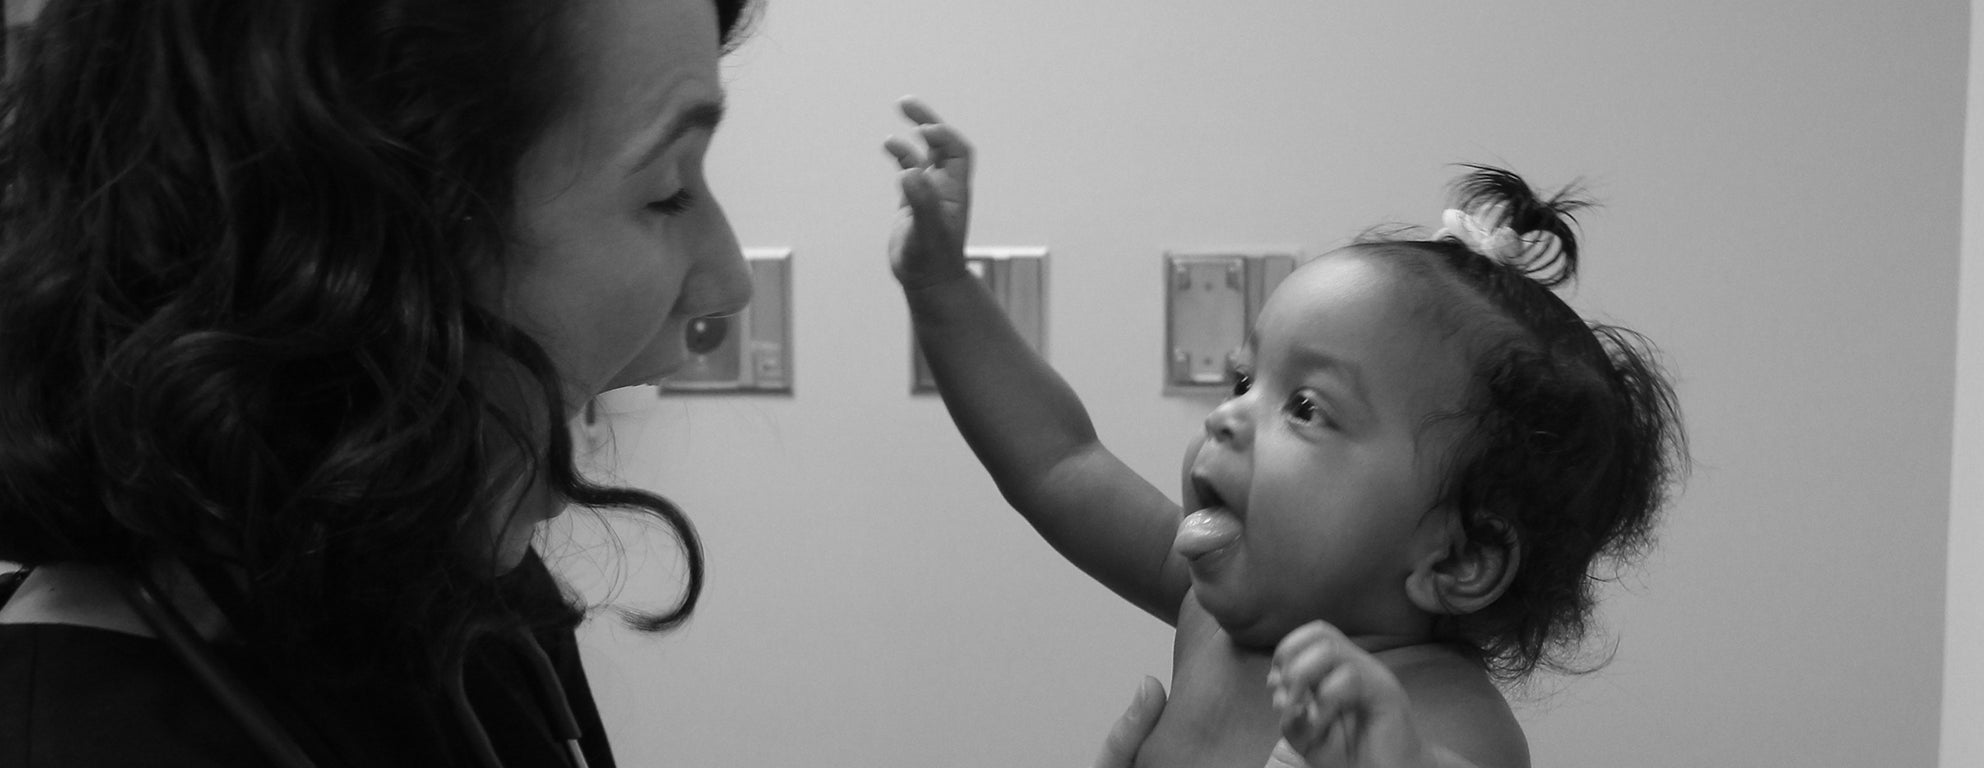 Black and white photo of Lucy Marcil making a silly face while holding a baby in the clinic